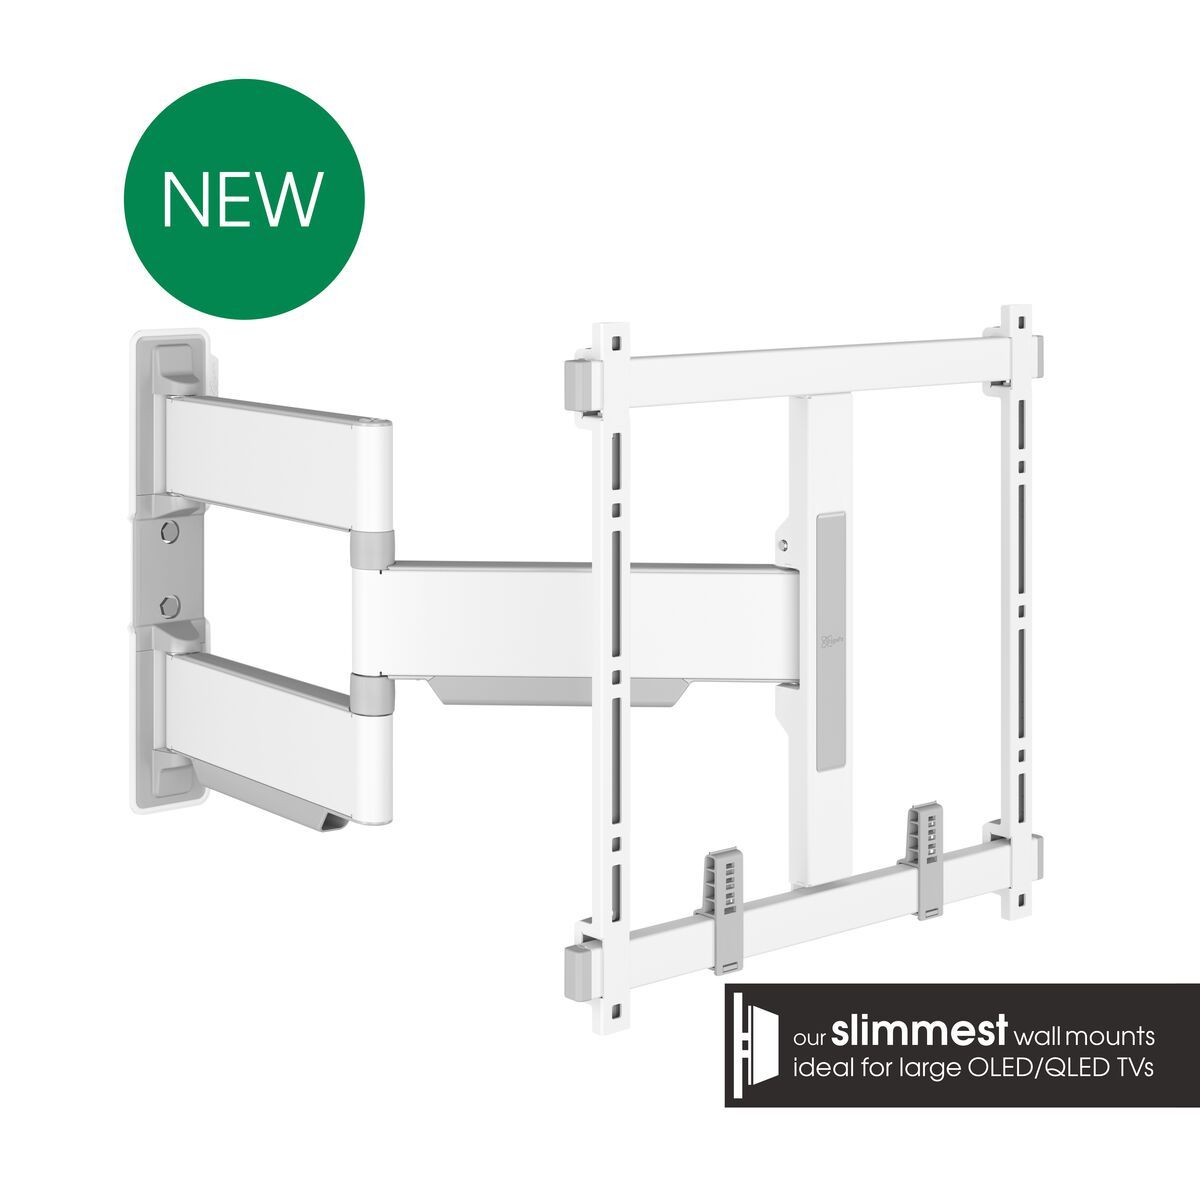 Vogel's TVM 5445 Full-Motion TV Wall Mount (white) - Suitable for 32 up to 65 inch TVs - Full motion (up to 180°) swivel - Promo